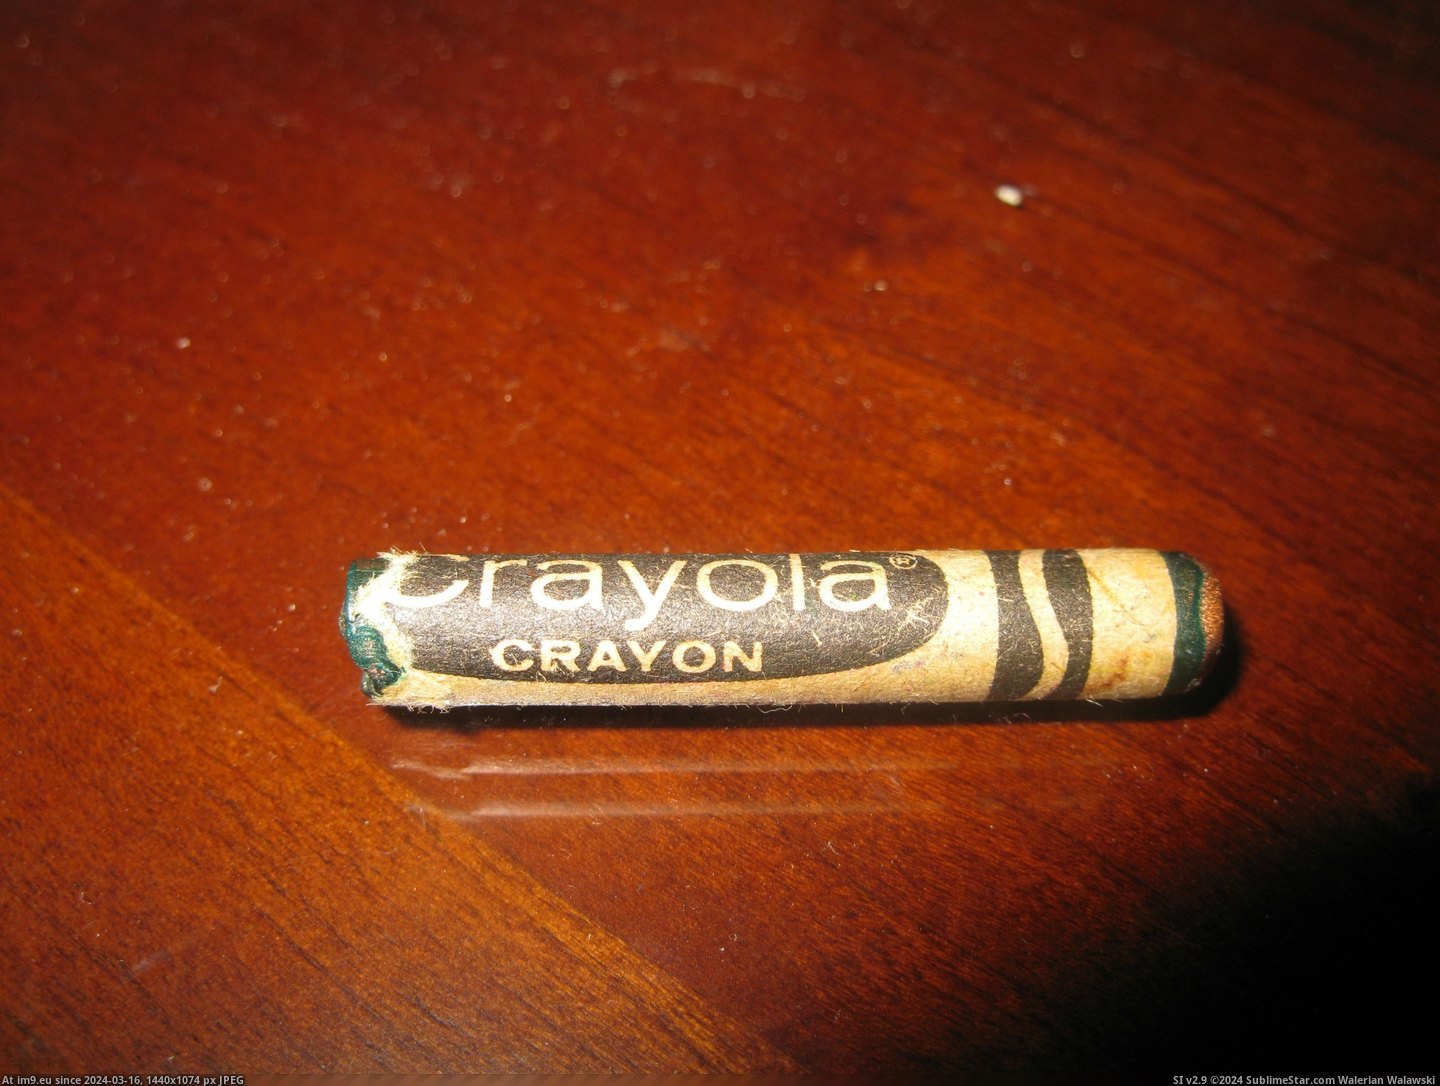 #Old #Can #Green #Copper #Tarnish #Turn #Colored #Crayons [Mildlyinteresting] Copper-colored crayons can actually tarnish and turn green if they're old enough 4 Pic. (Изображение из альбом My r/MILDLYINTERESTING favs))